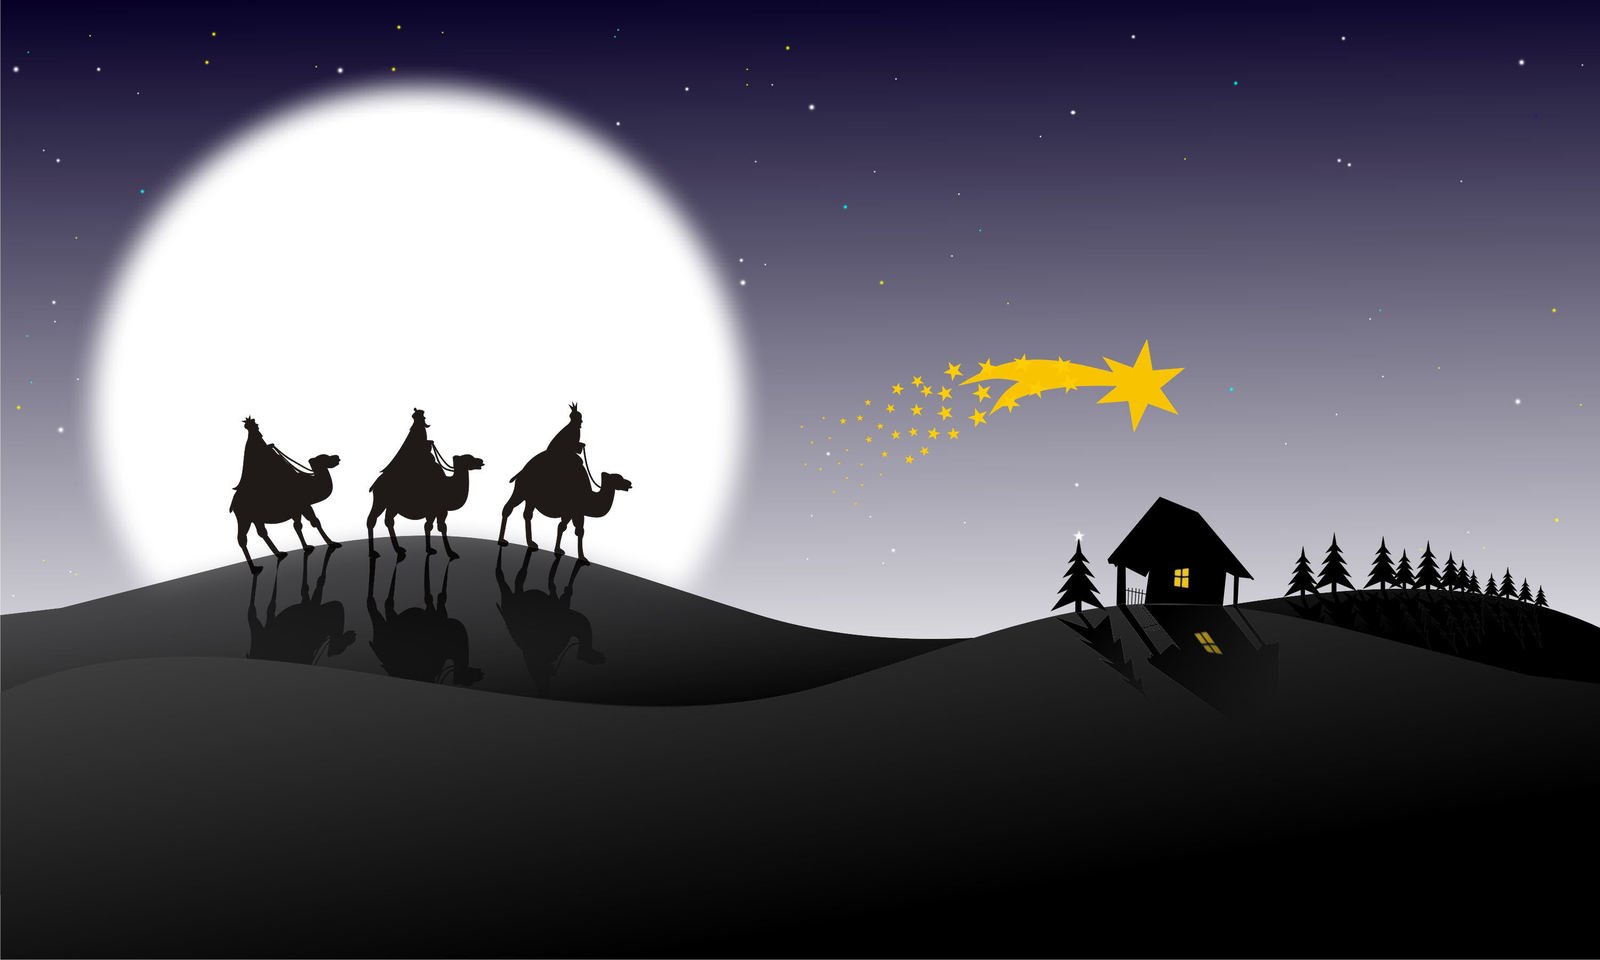 christmas nativity scene with three wise men riding camels in the night sky